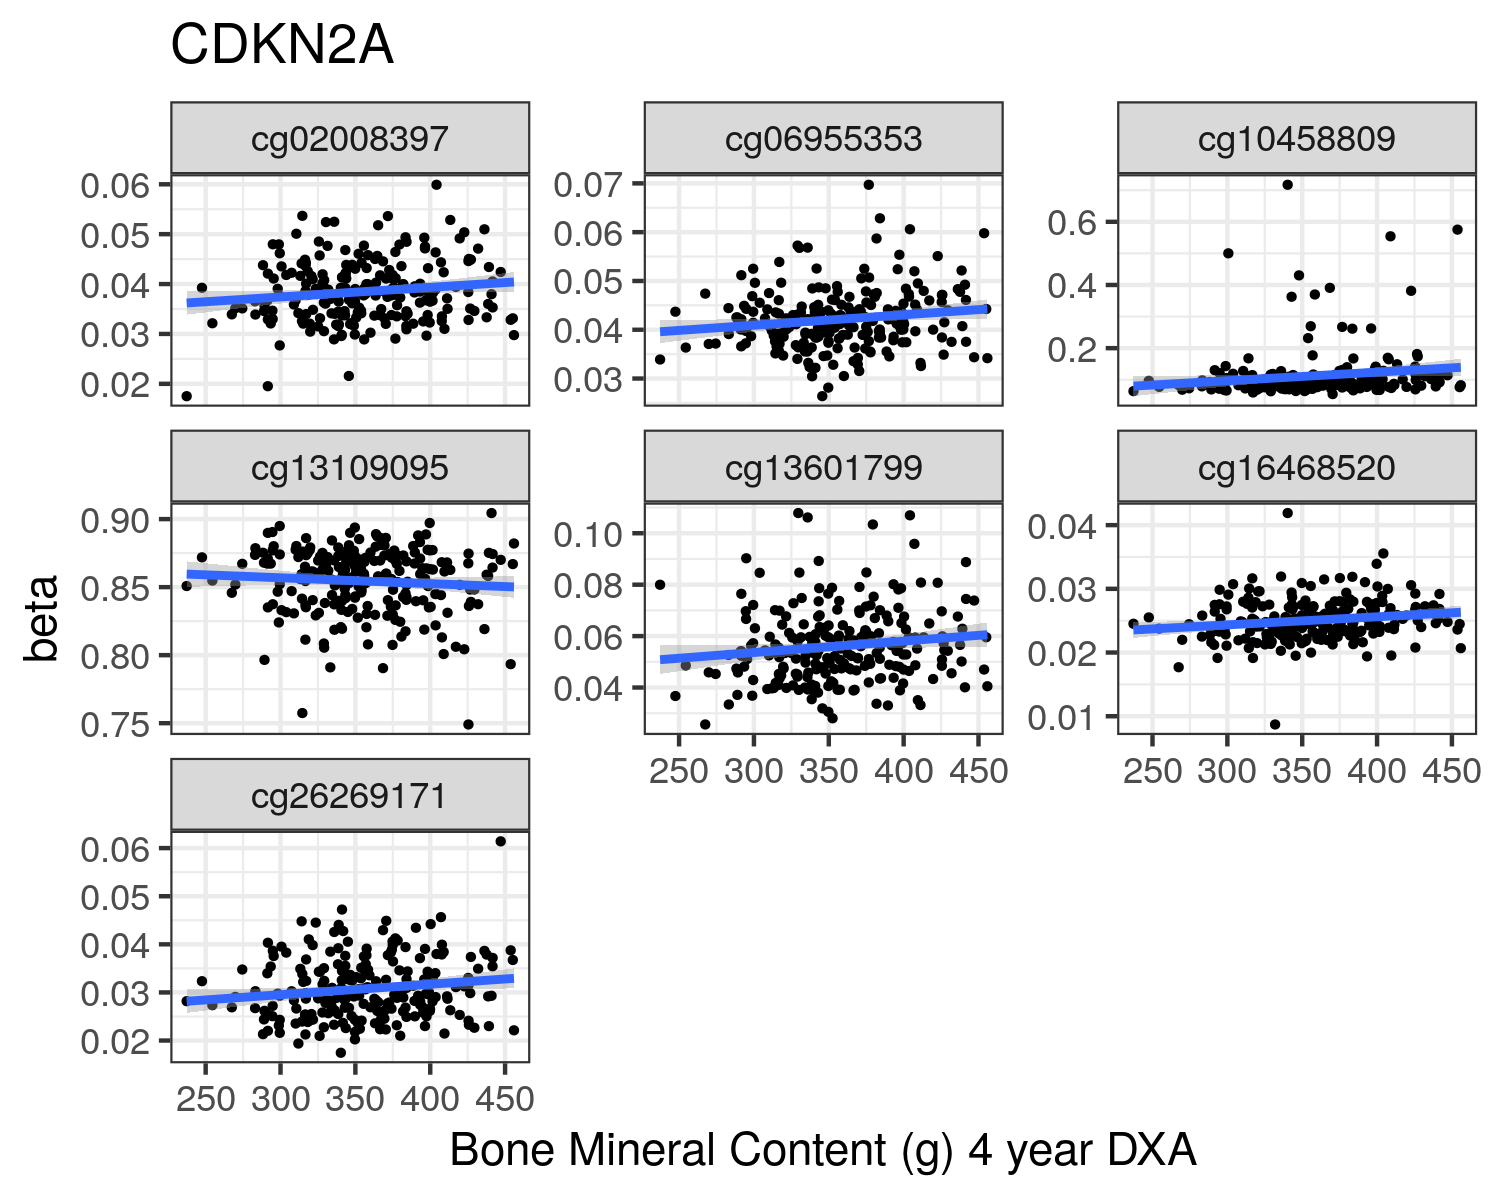 CDKN2A gene associated probes showing nominally significant (p<0.05) changes in DNA methylation with bone mineral density at 4 years